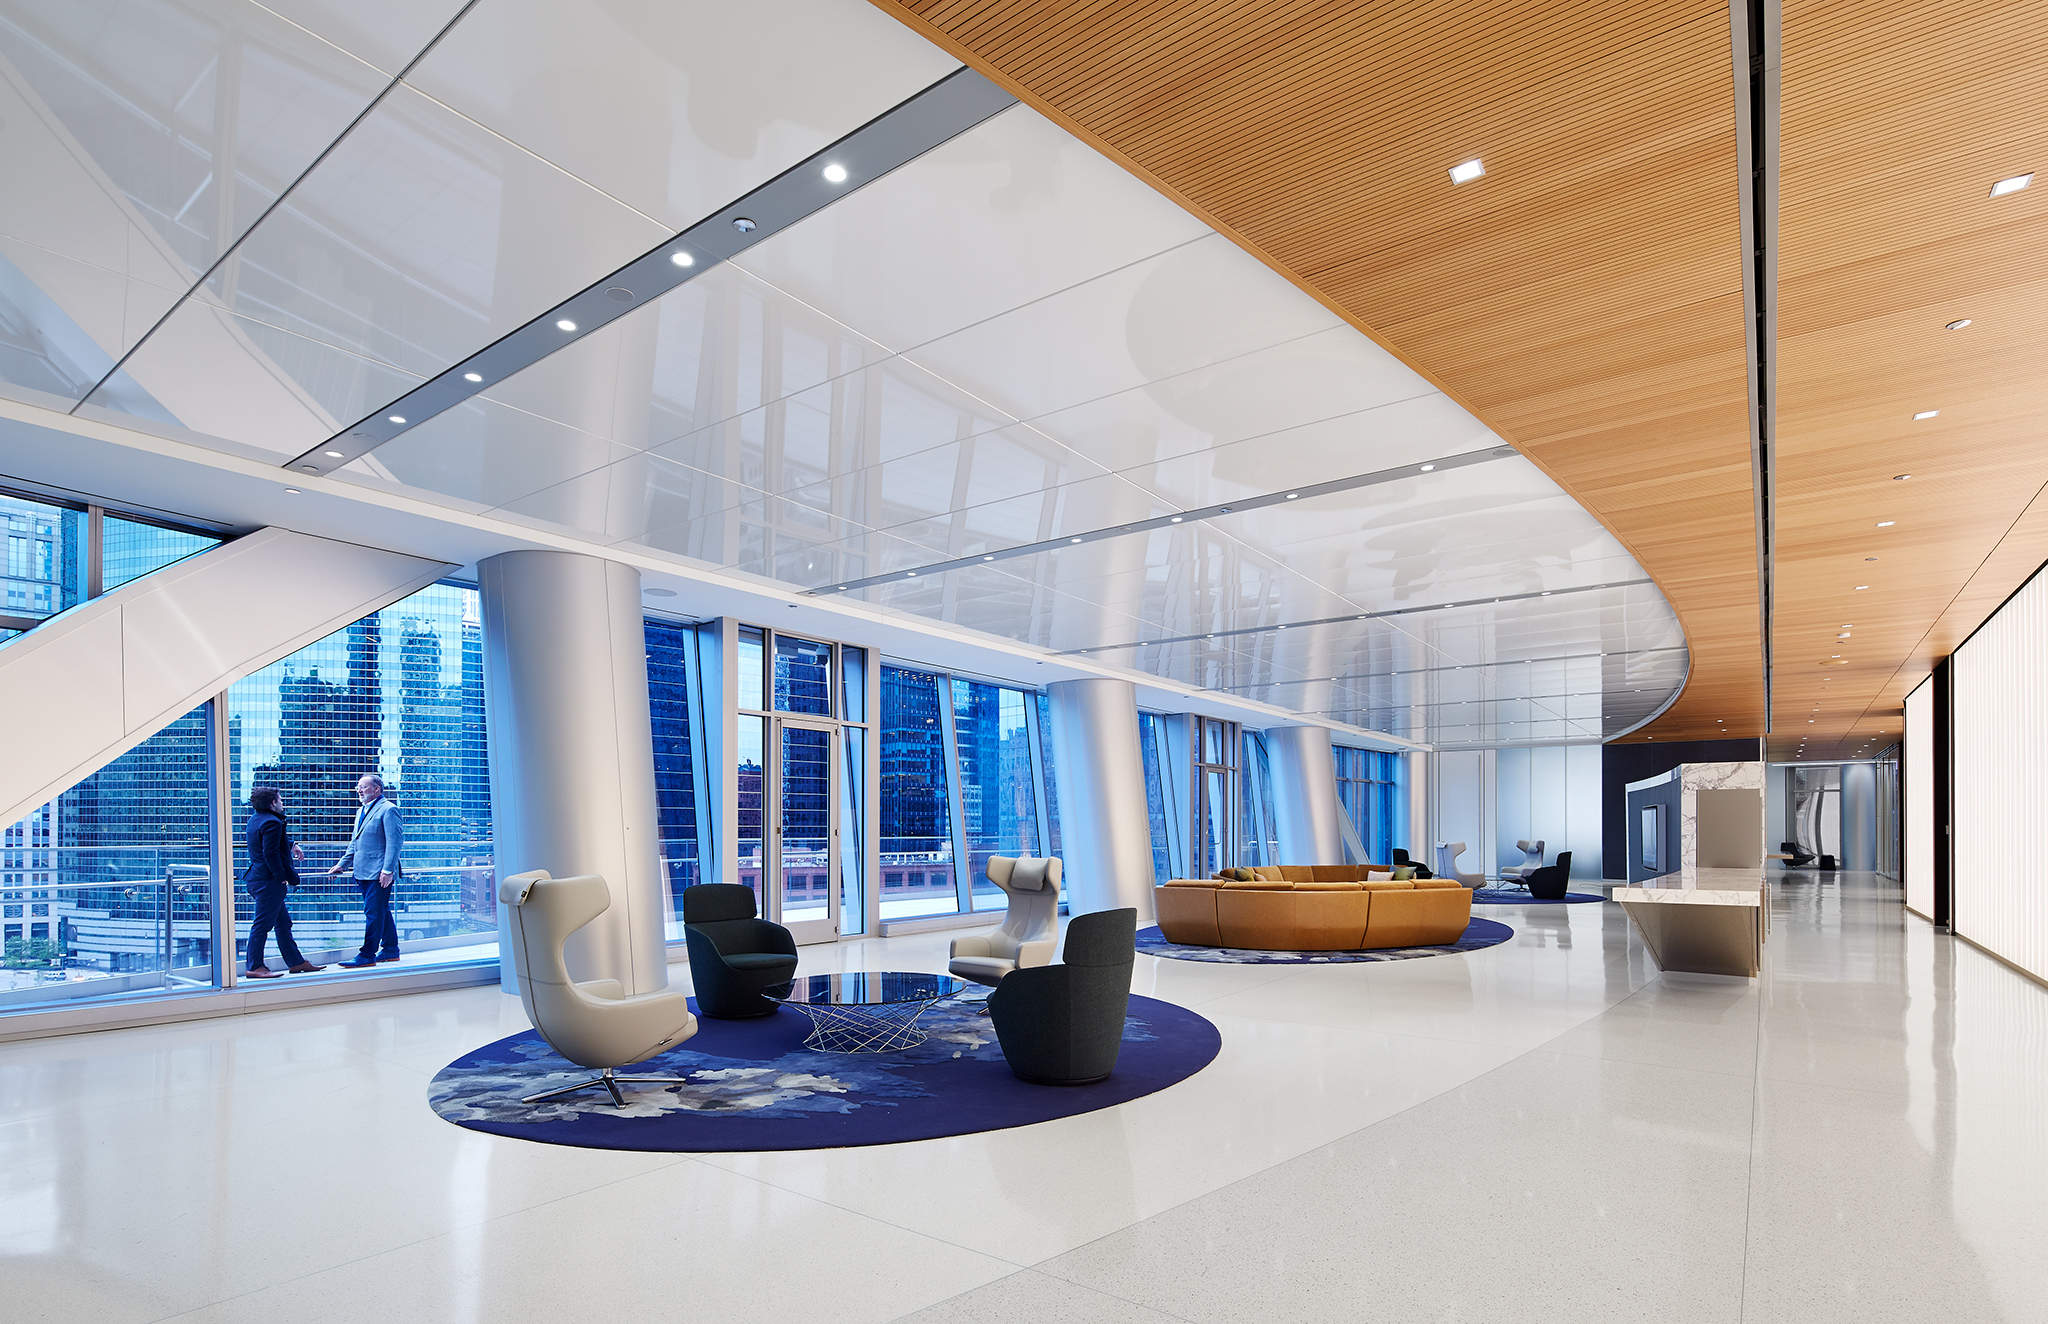  DLA Piper LLP  Gensler  Chicago, IL     View Full Project  